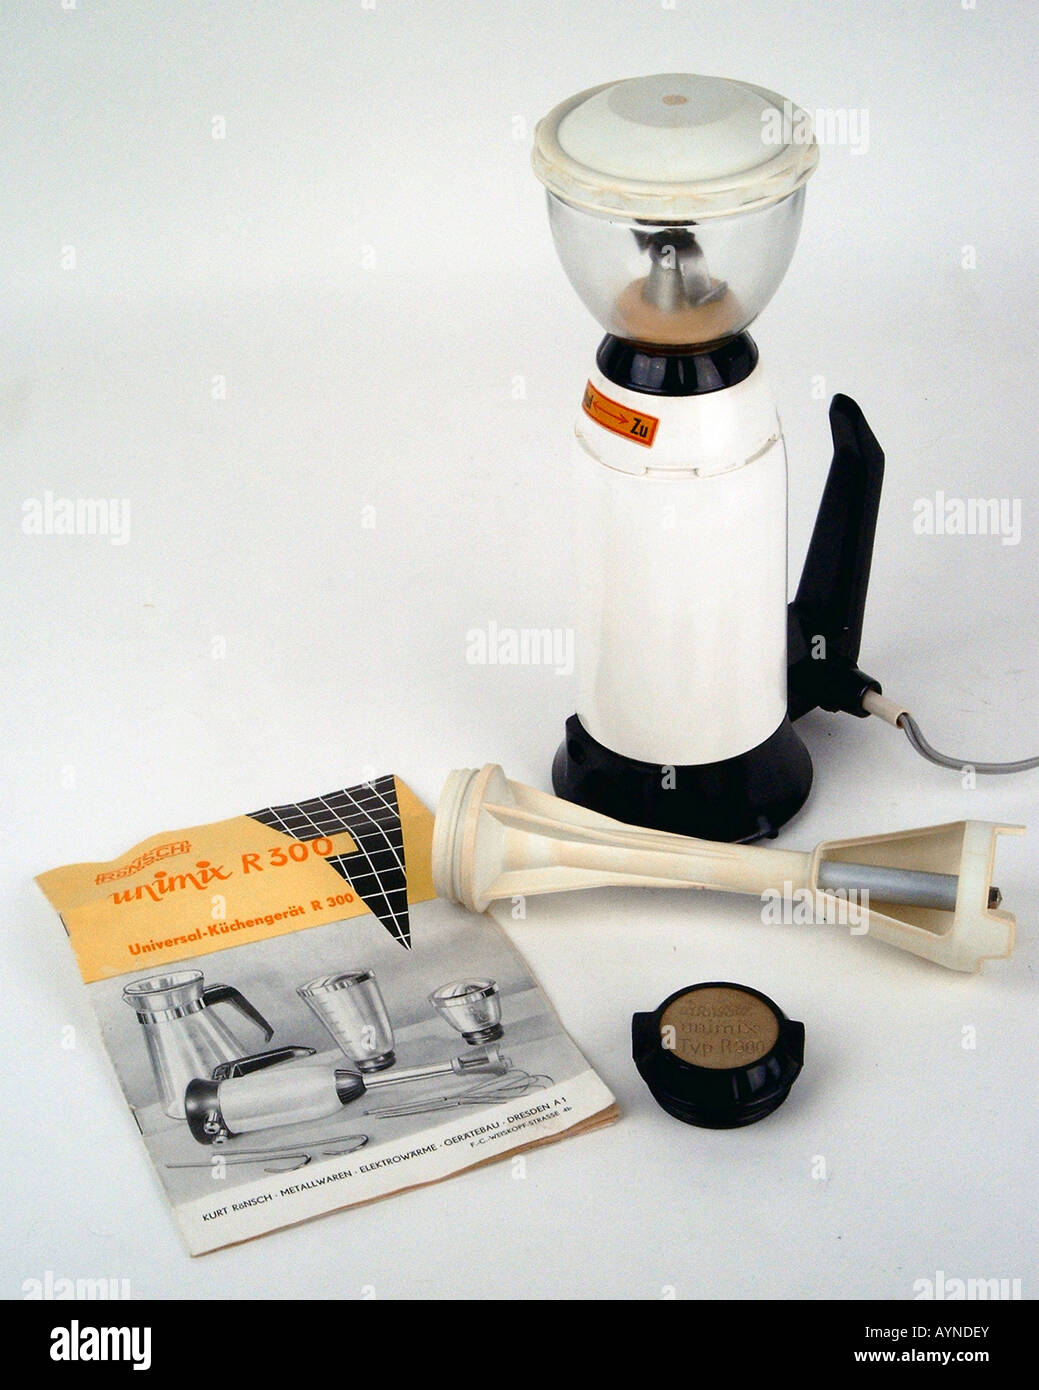 https://c8.alamy.com/comp/AYNDEY/household-kitchen-and-kitchenware-electric-hand-grater-unimix-r-300-AYNDEY.jpg